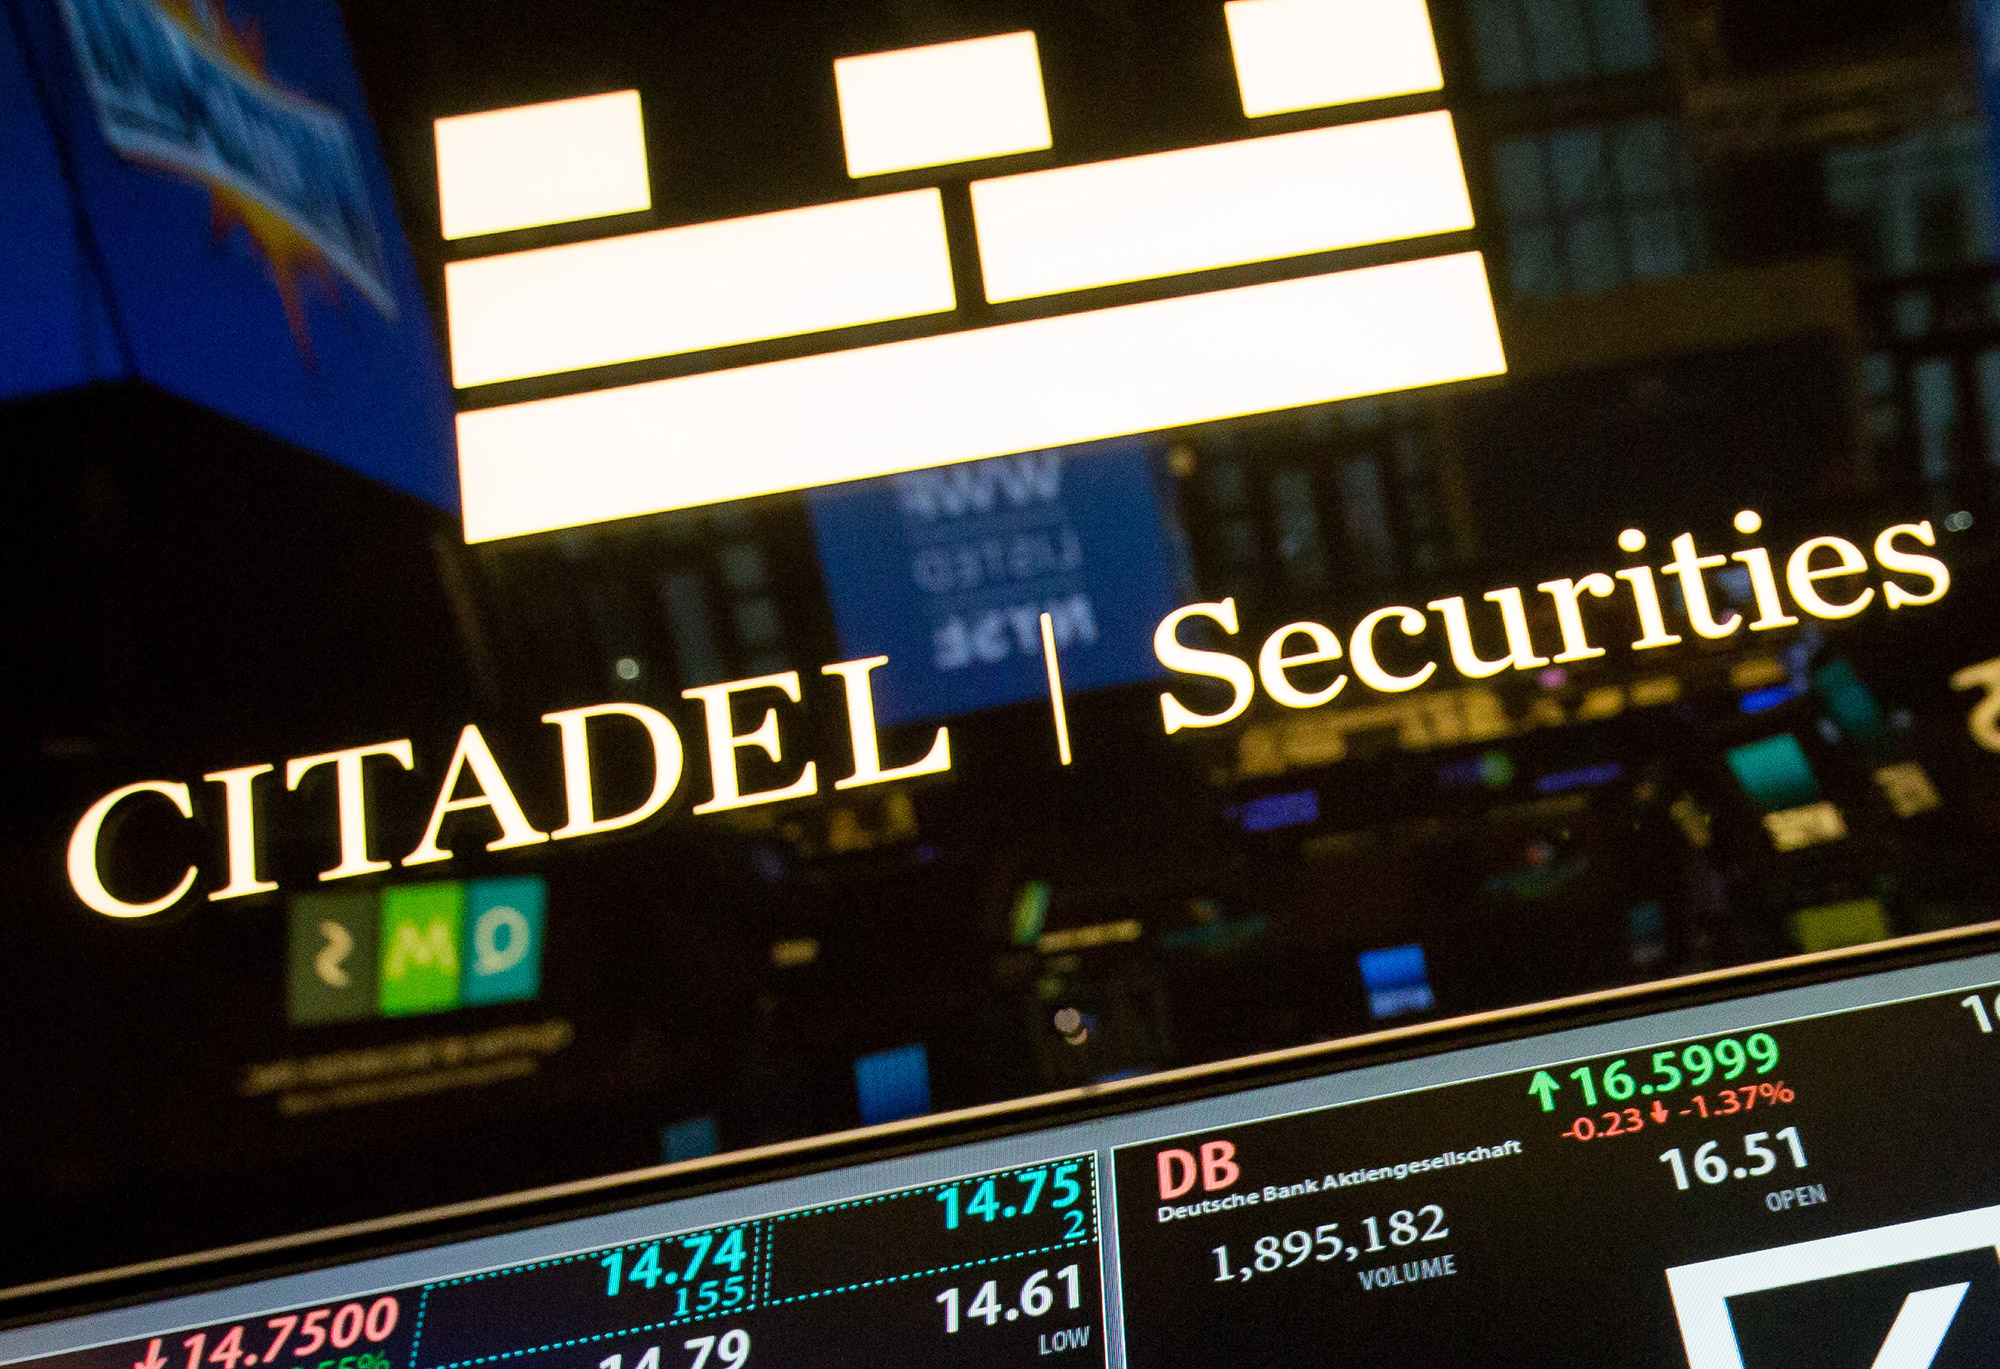 Citadel Securities Doubled Profit as Dominance Grew in 2020